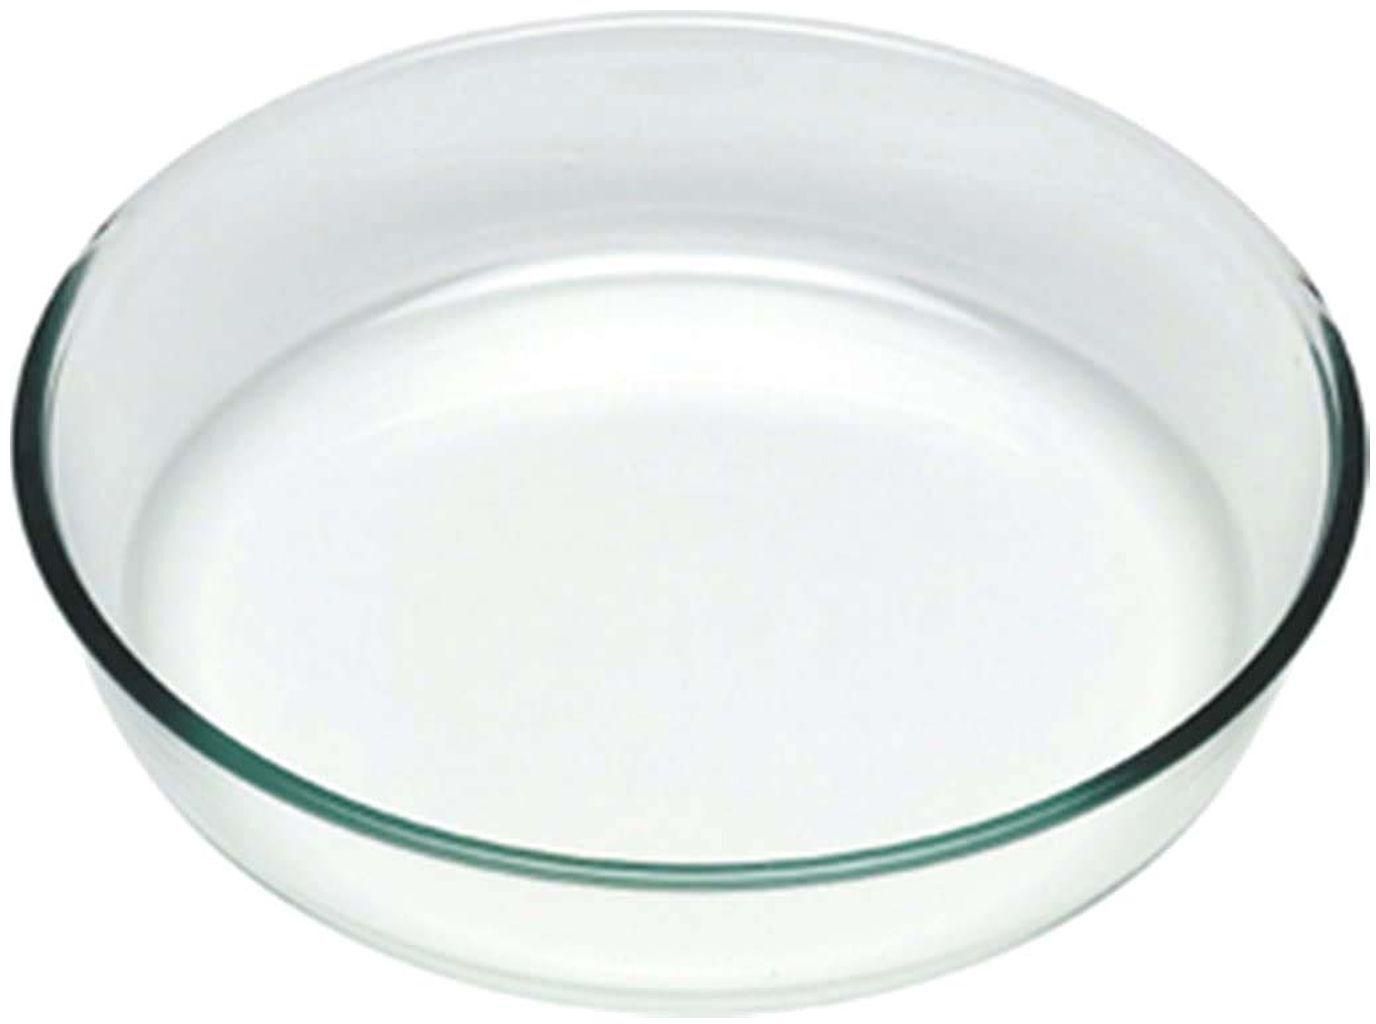 Pyrex Classic Round Cake Pan - 26 Cm - Clear